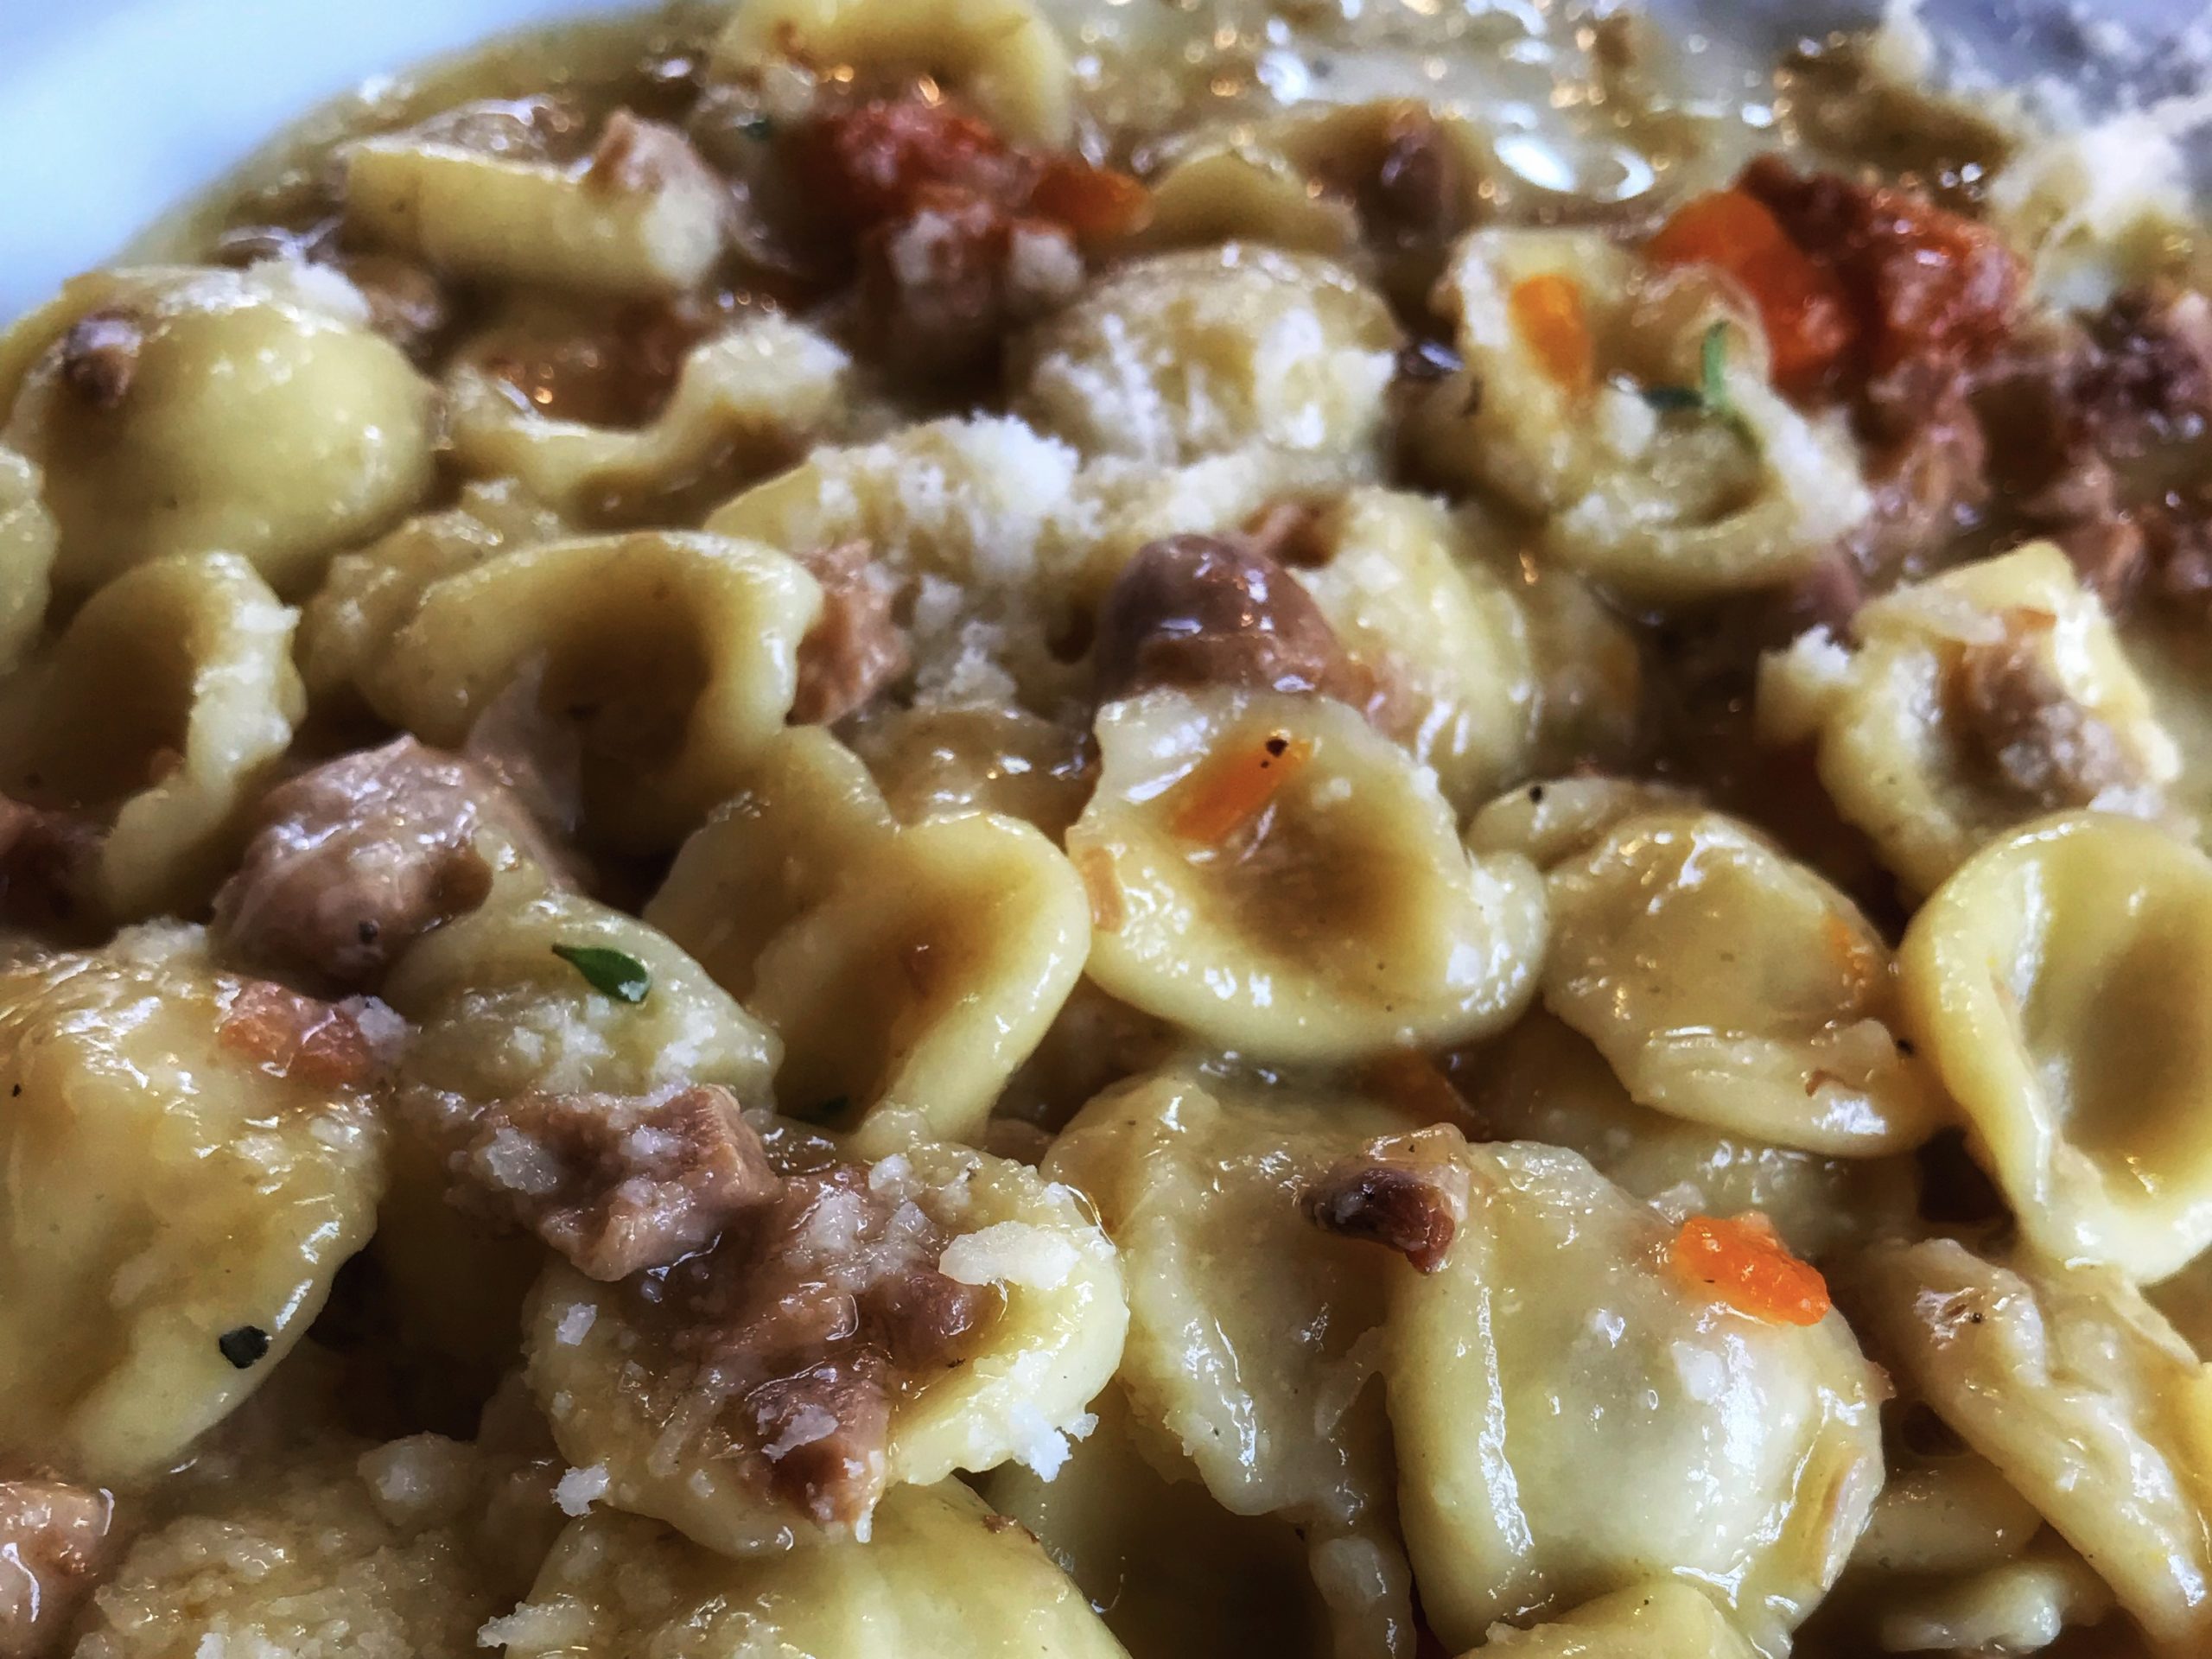 orecchiette with lamb and a white sauce - an Easter favourite